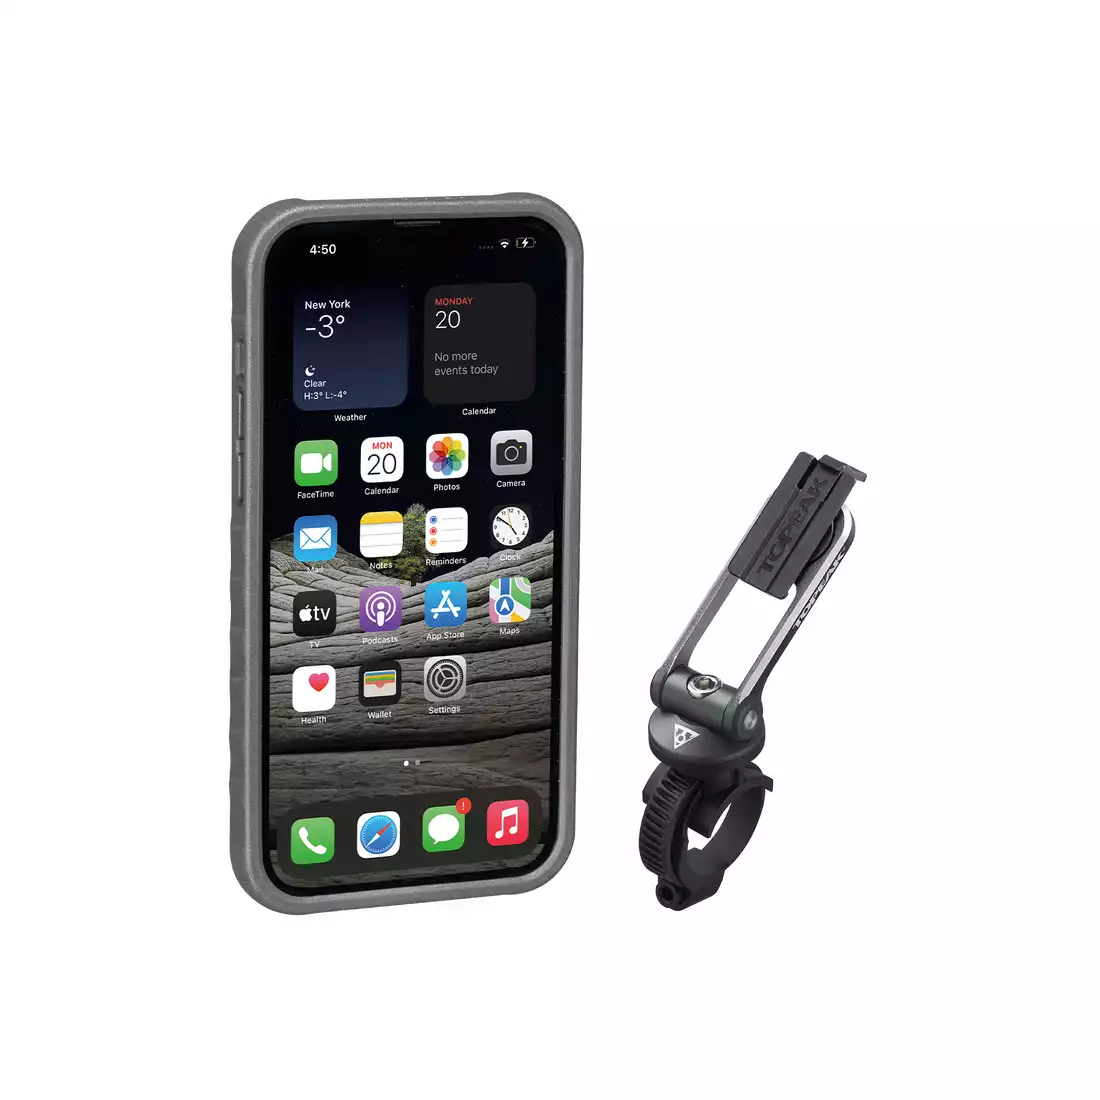 TOPEAK RIDECASE Case + bicycle holder for the phone Iphone 13 Pro Max, black / gray